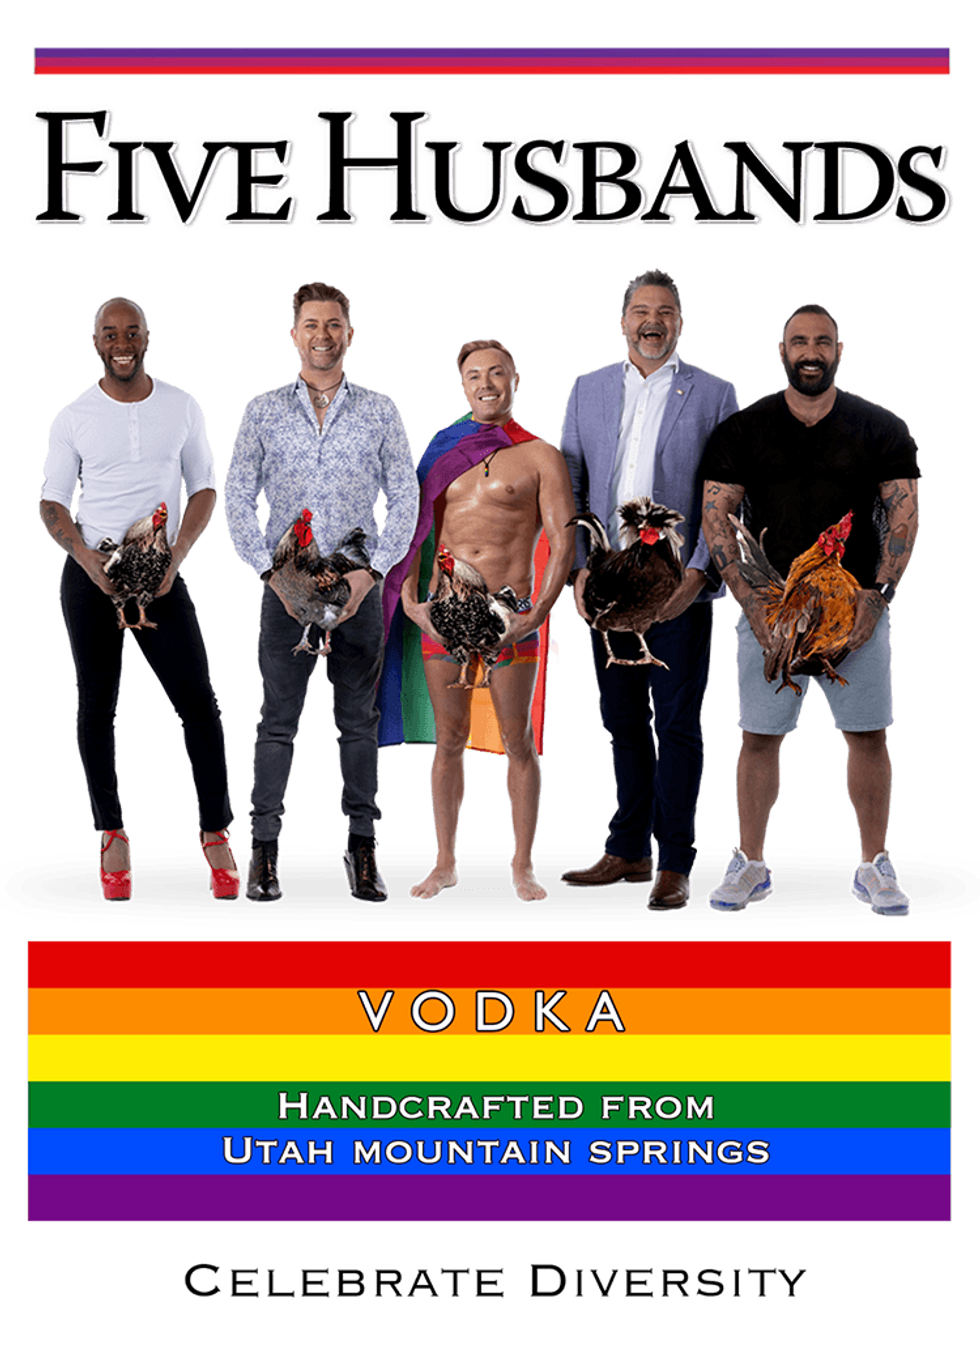 Ogden\u2019s Own annual Five Husbands Vodka is conducting a nationwide casting call for qualified hubbies to appear on their 2022 label.